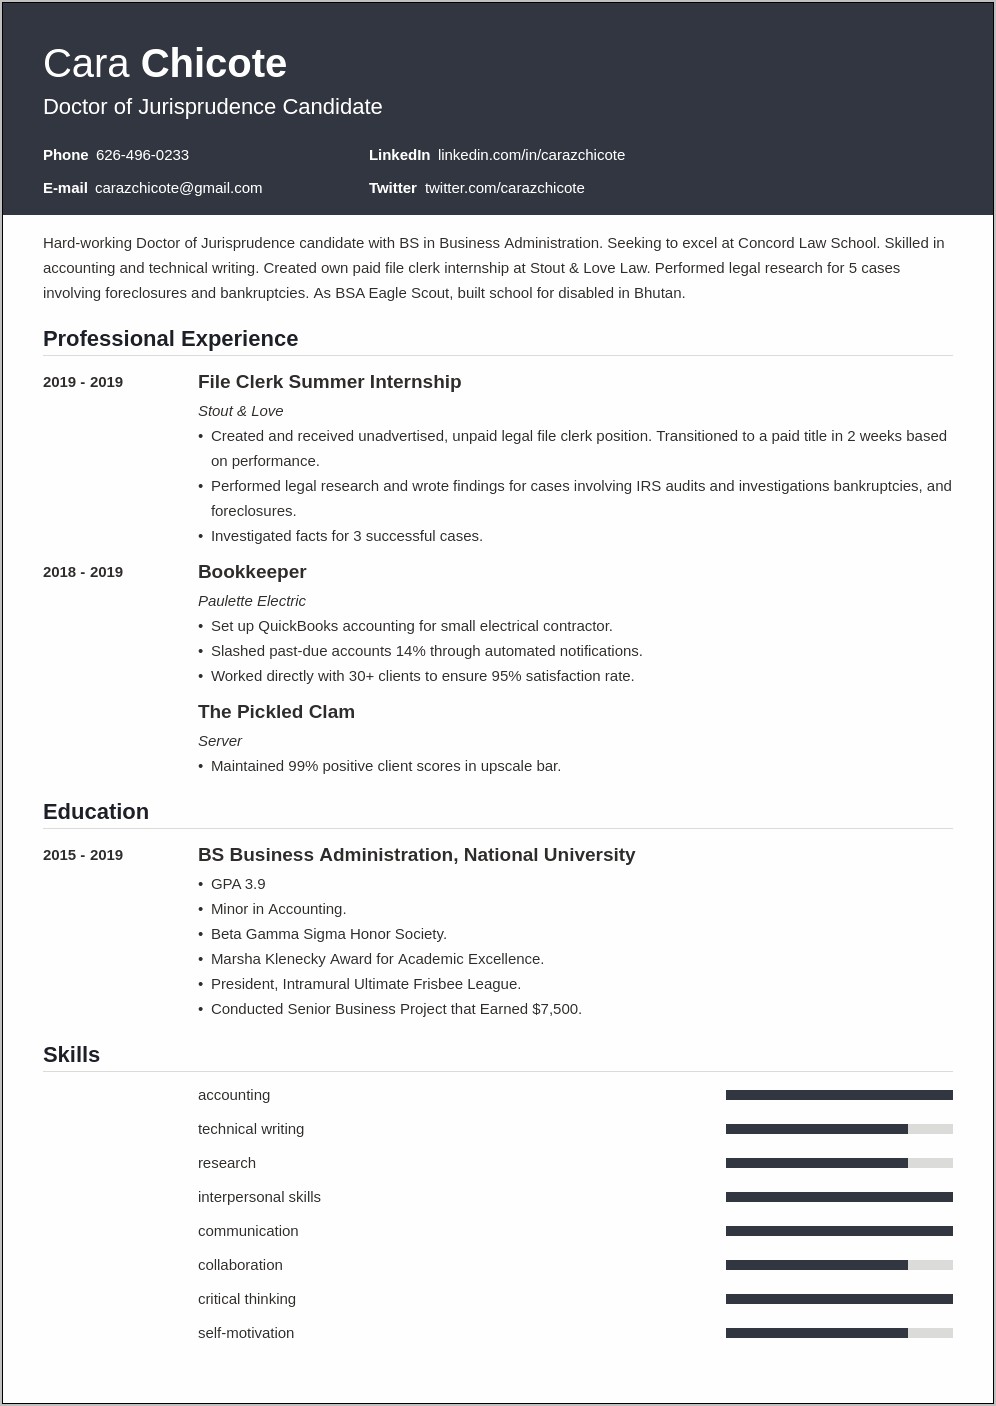 Resume Summary For Law School Applicant